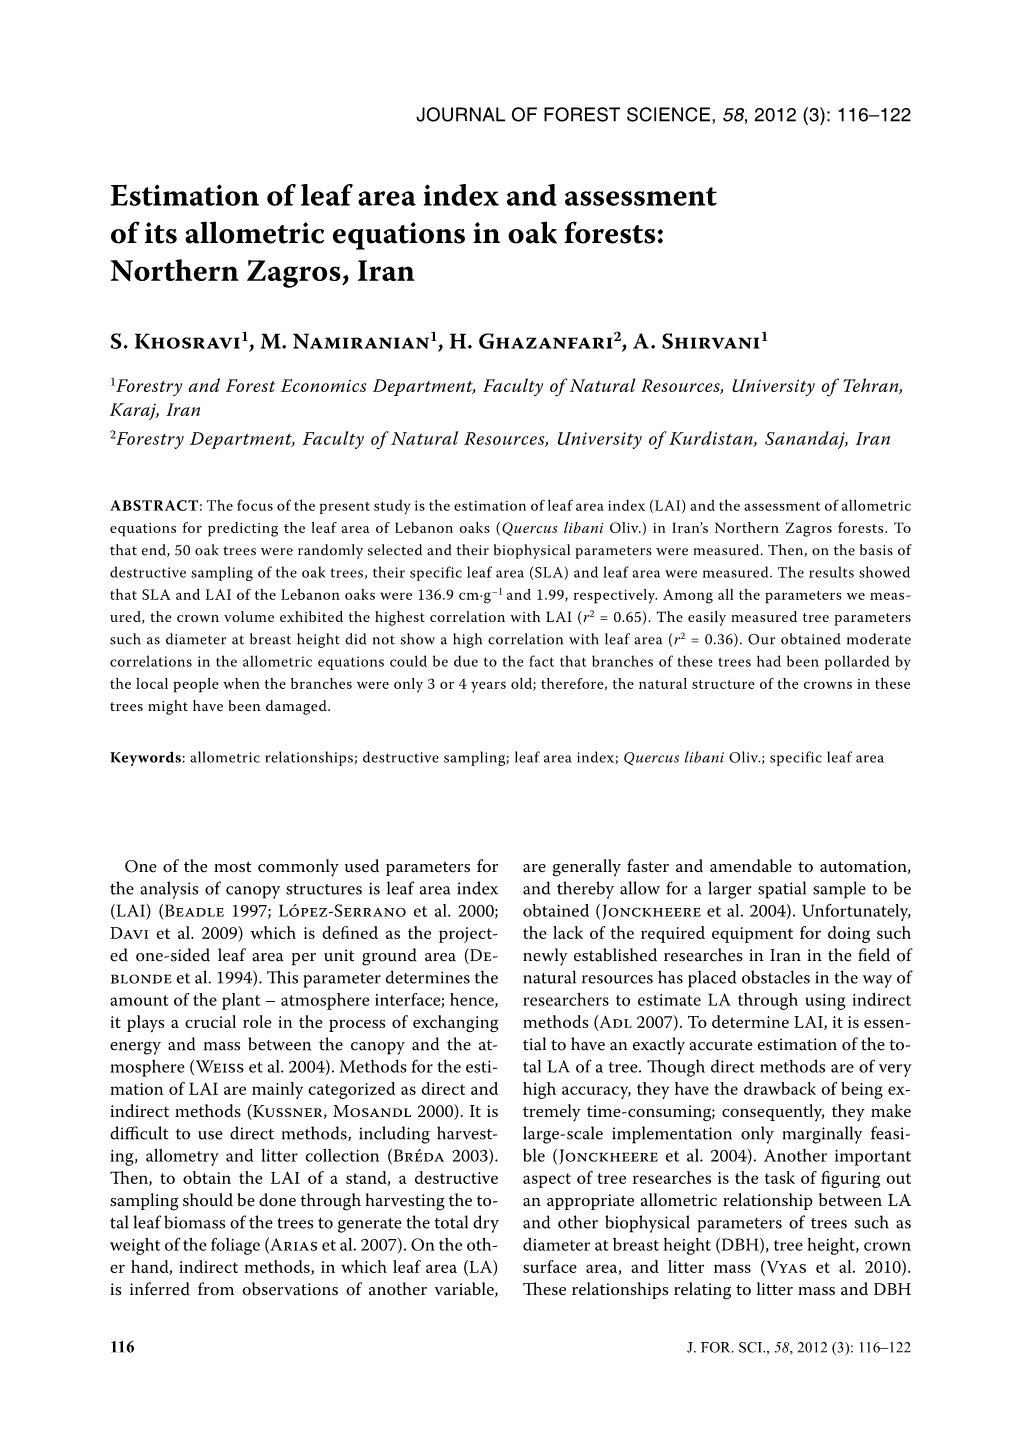 Estimation of Leaf Area Index and Assessment of Its Allometric Equations in Oak Forests: Northern Zagros, Iran